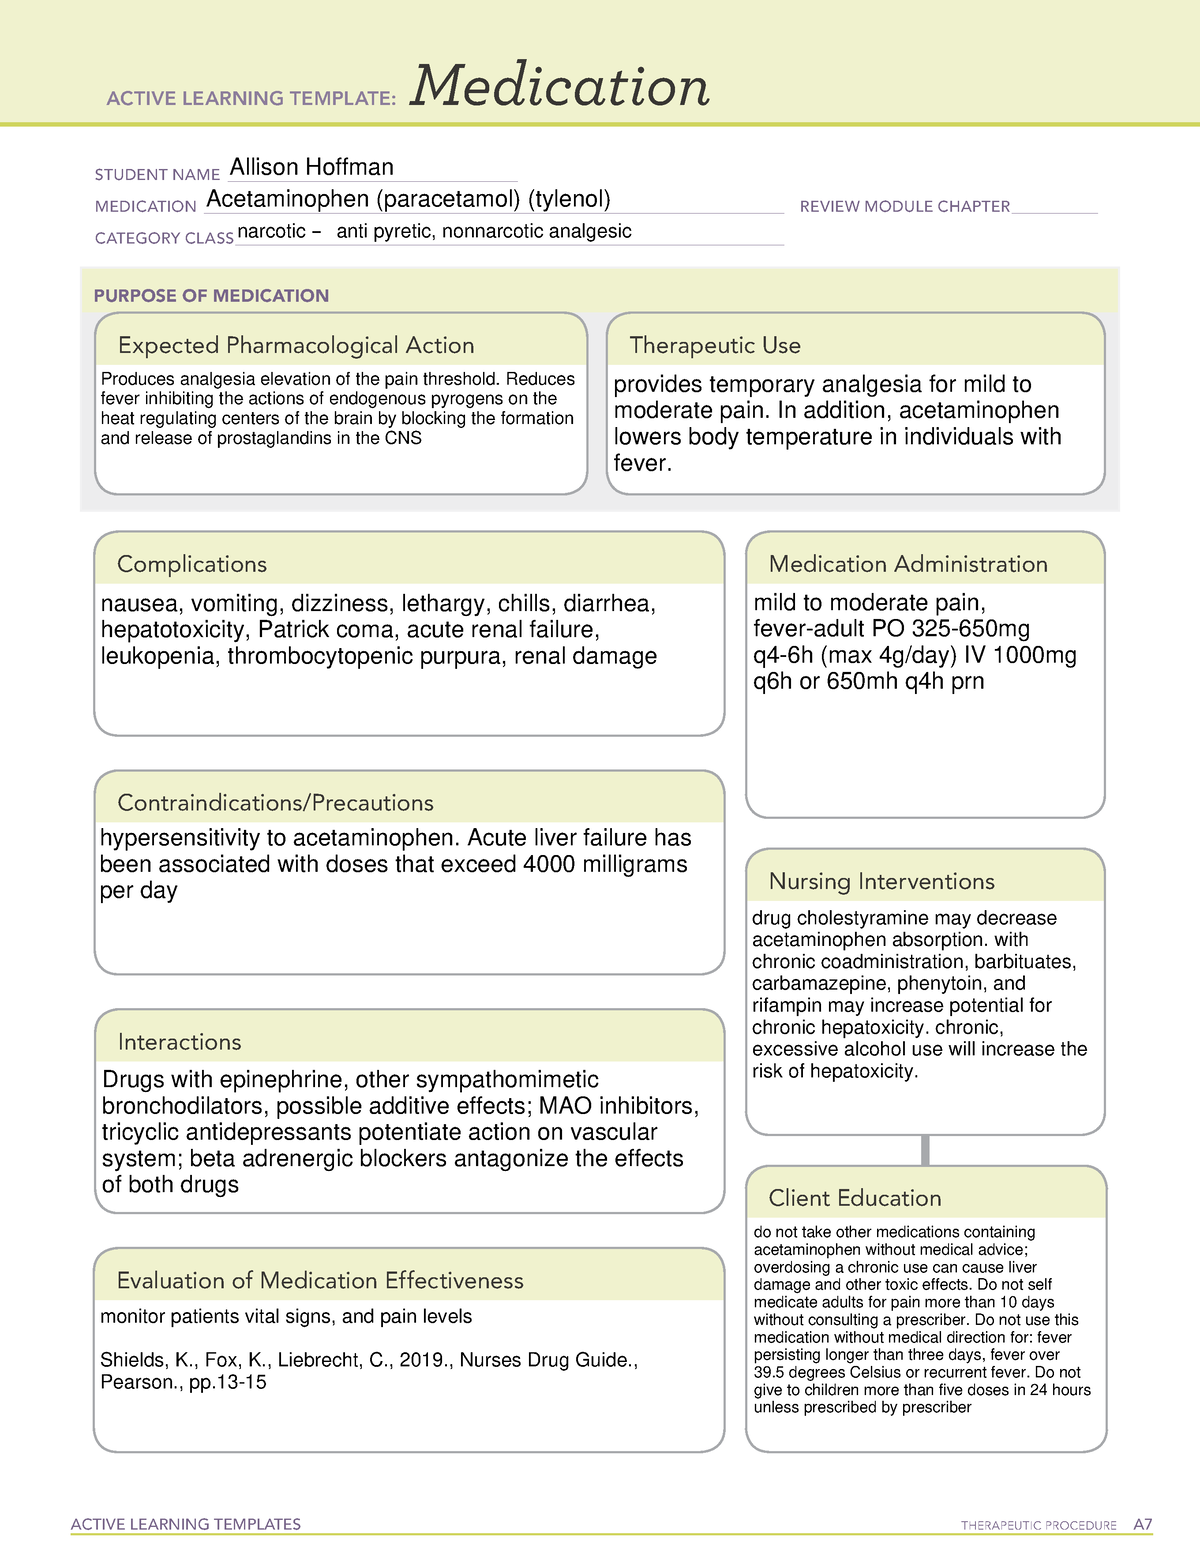 Acetaminophen med card ACTIVE LEARNING TEMPLATES THERAPEUTIC